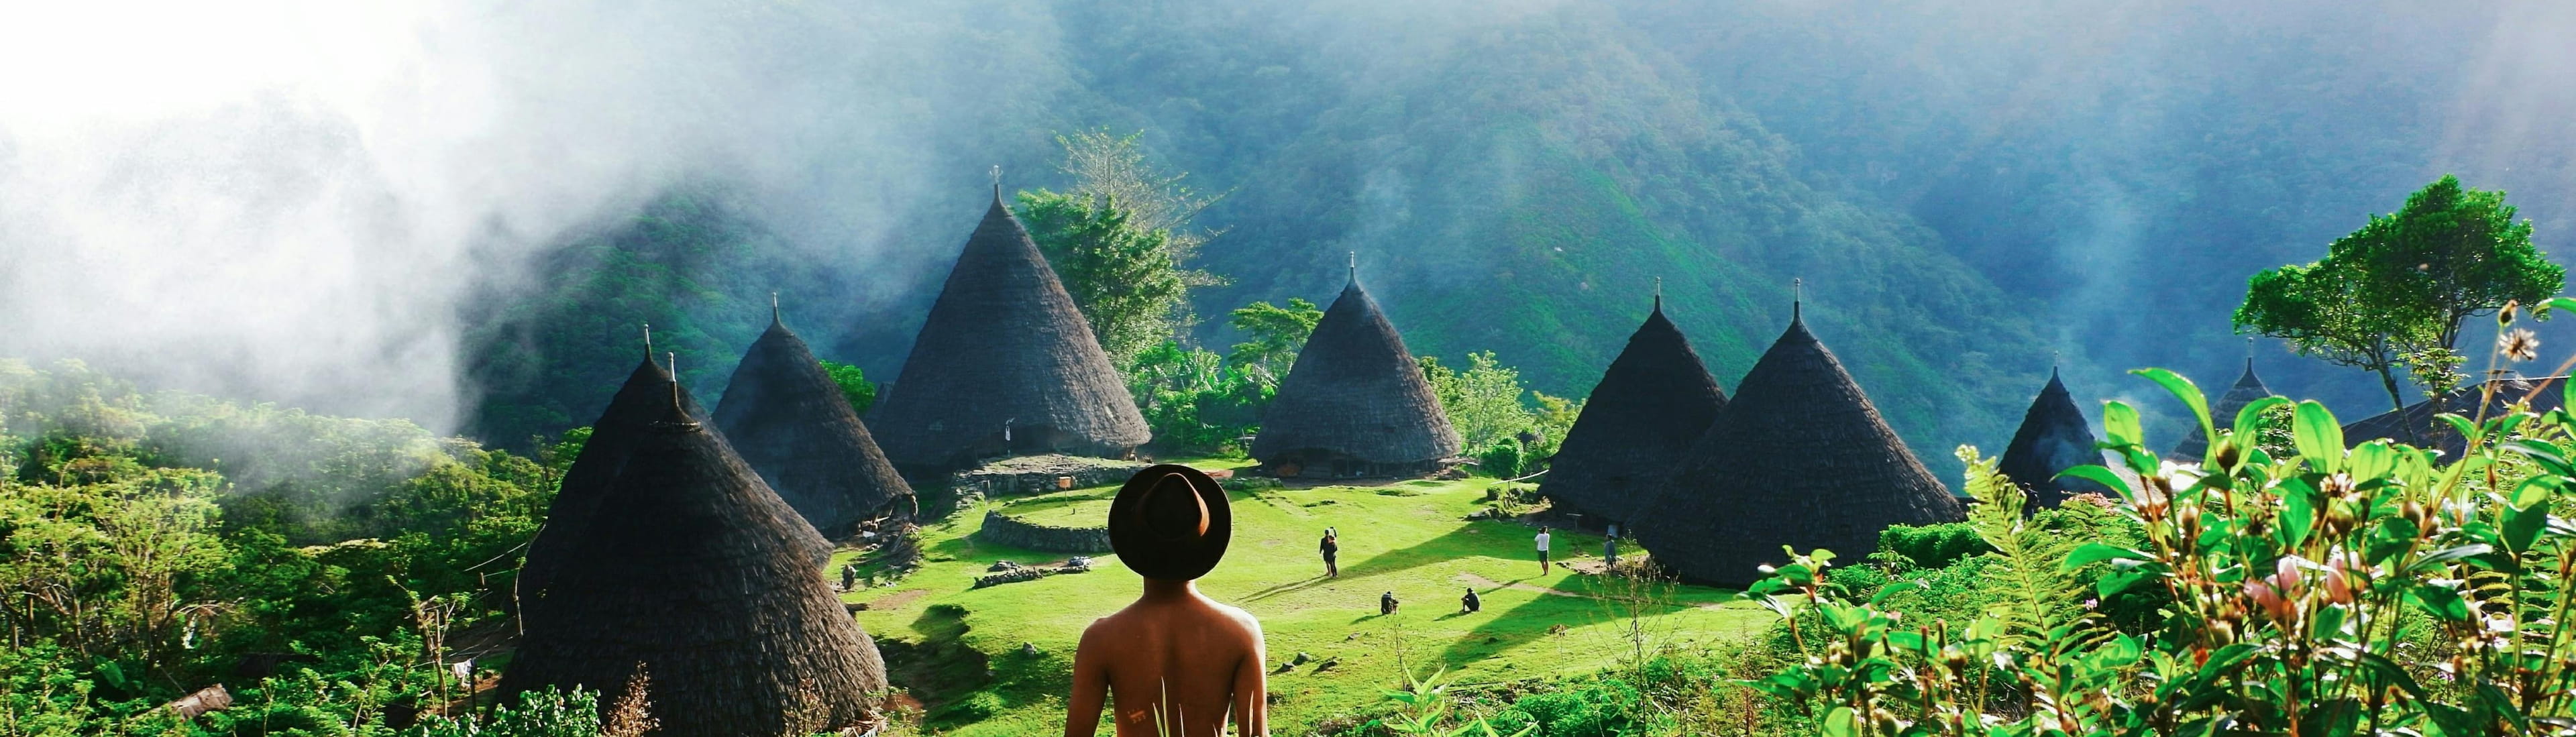 Discover the beauty of Indonesia's tropical paradise